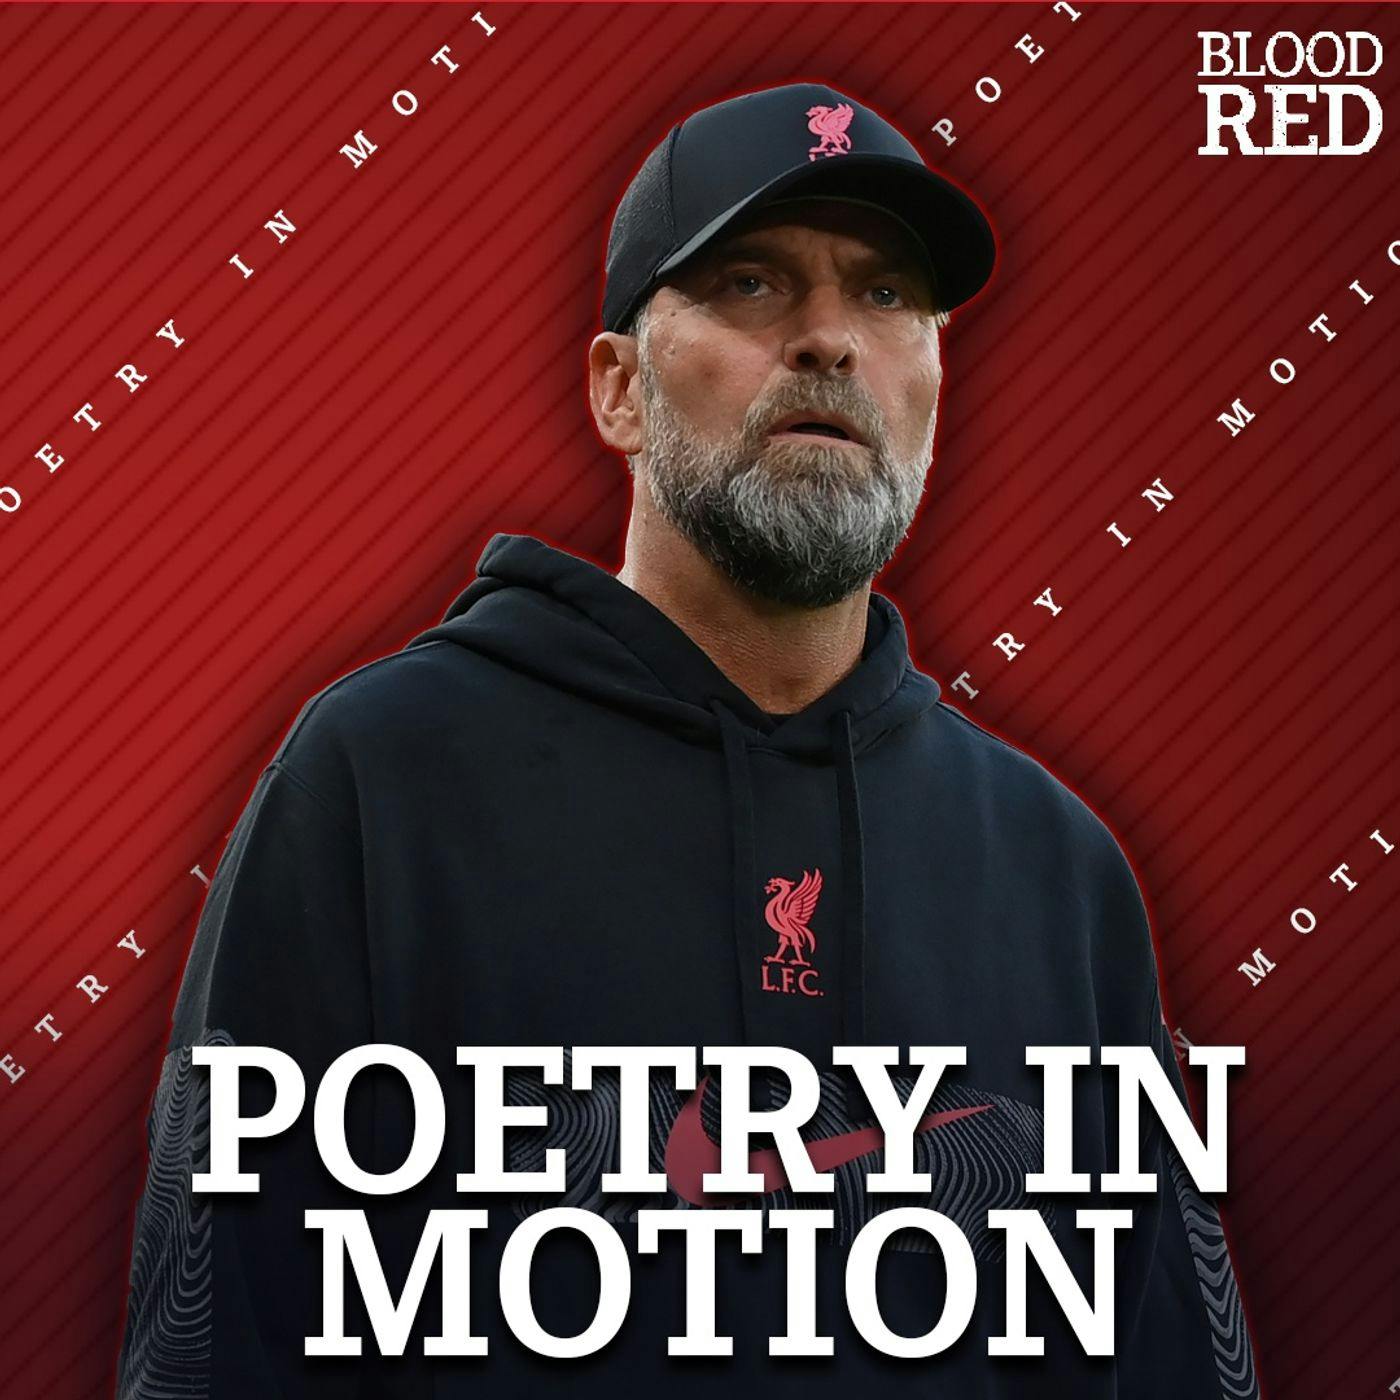 Poetry In Motion: Liverpool Disappoint At Old Trafford, Squad Depth Struggles & Missing Mane